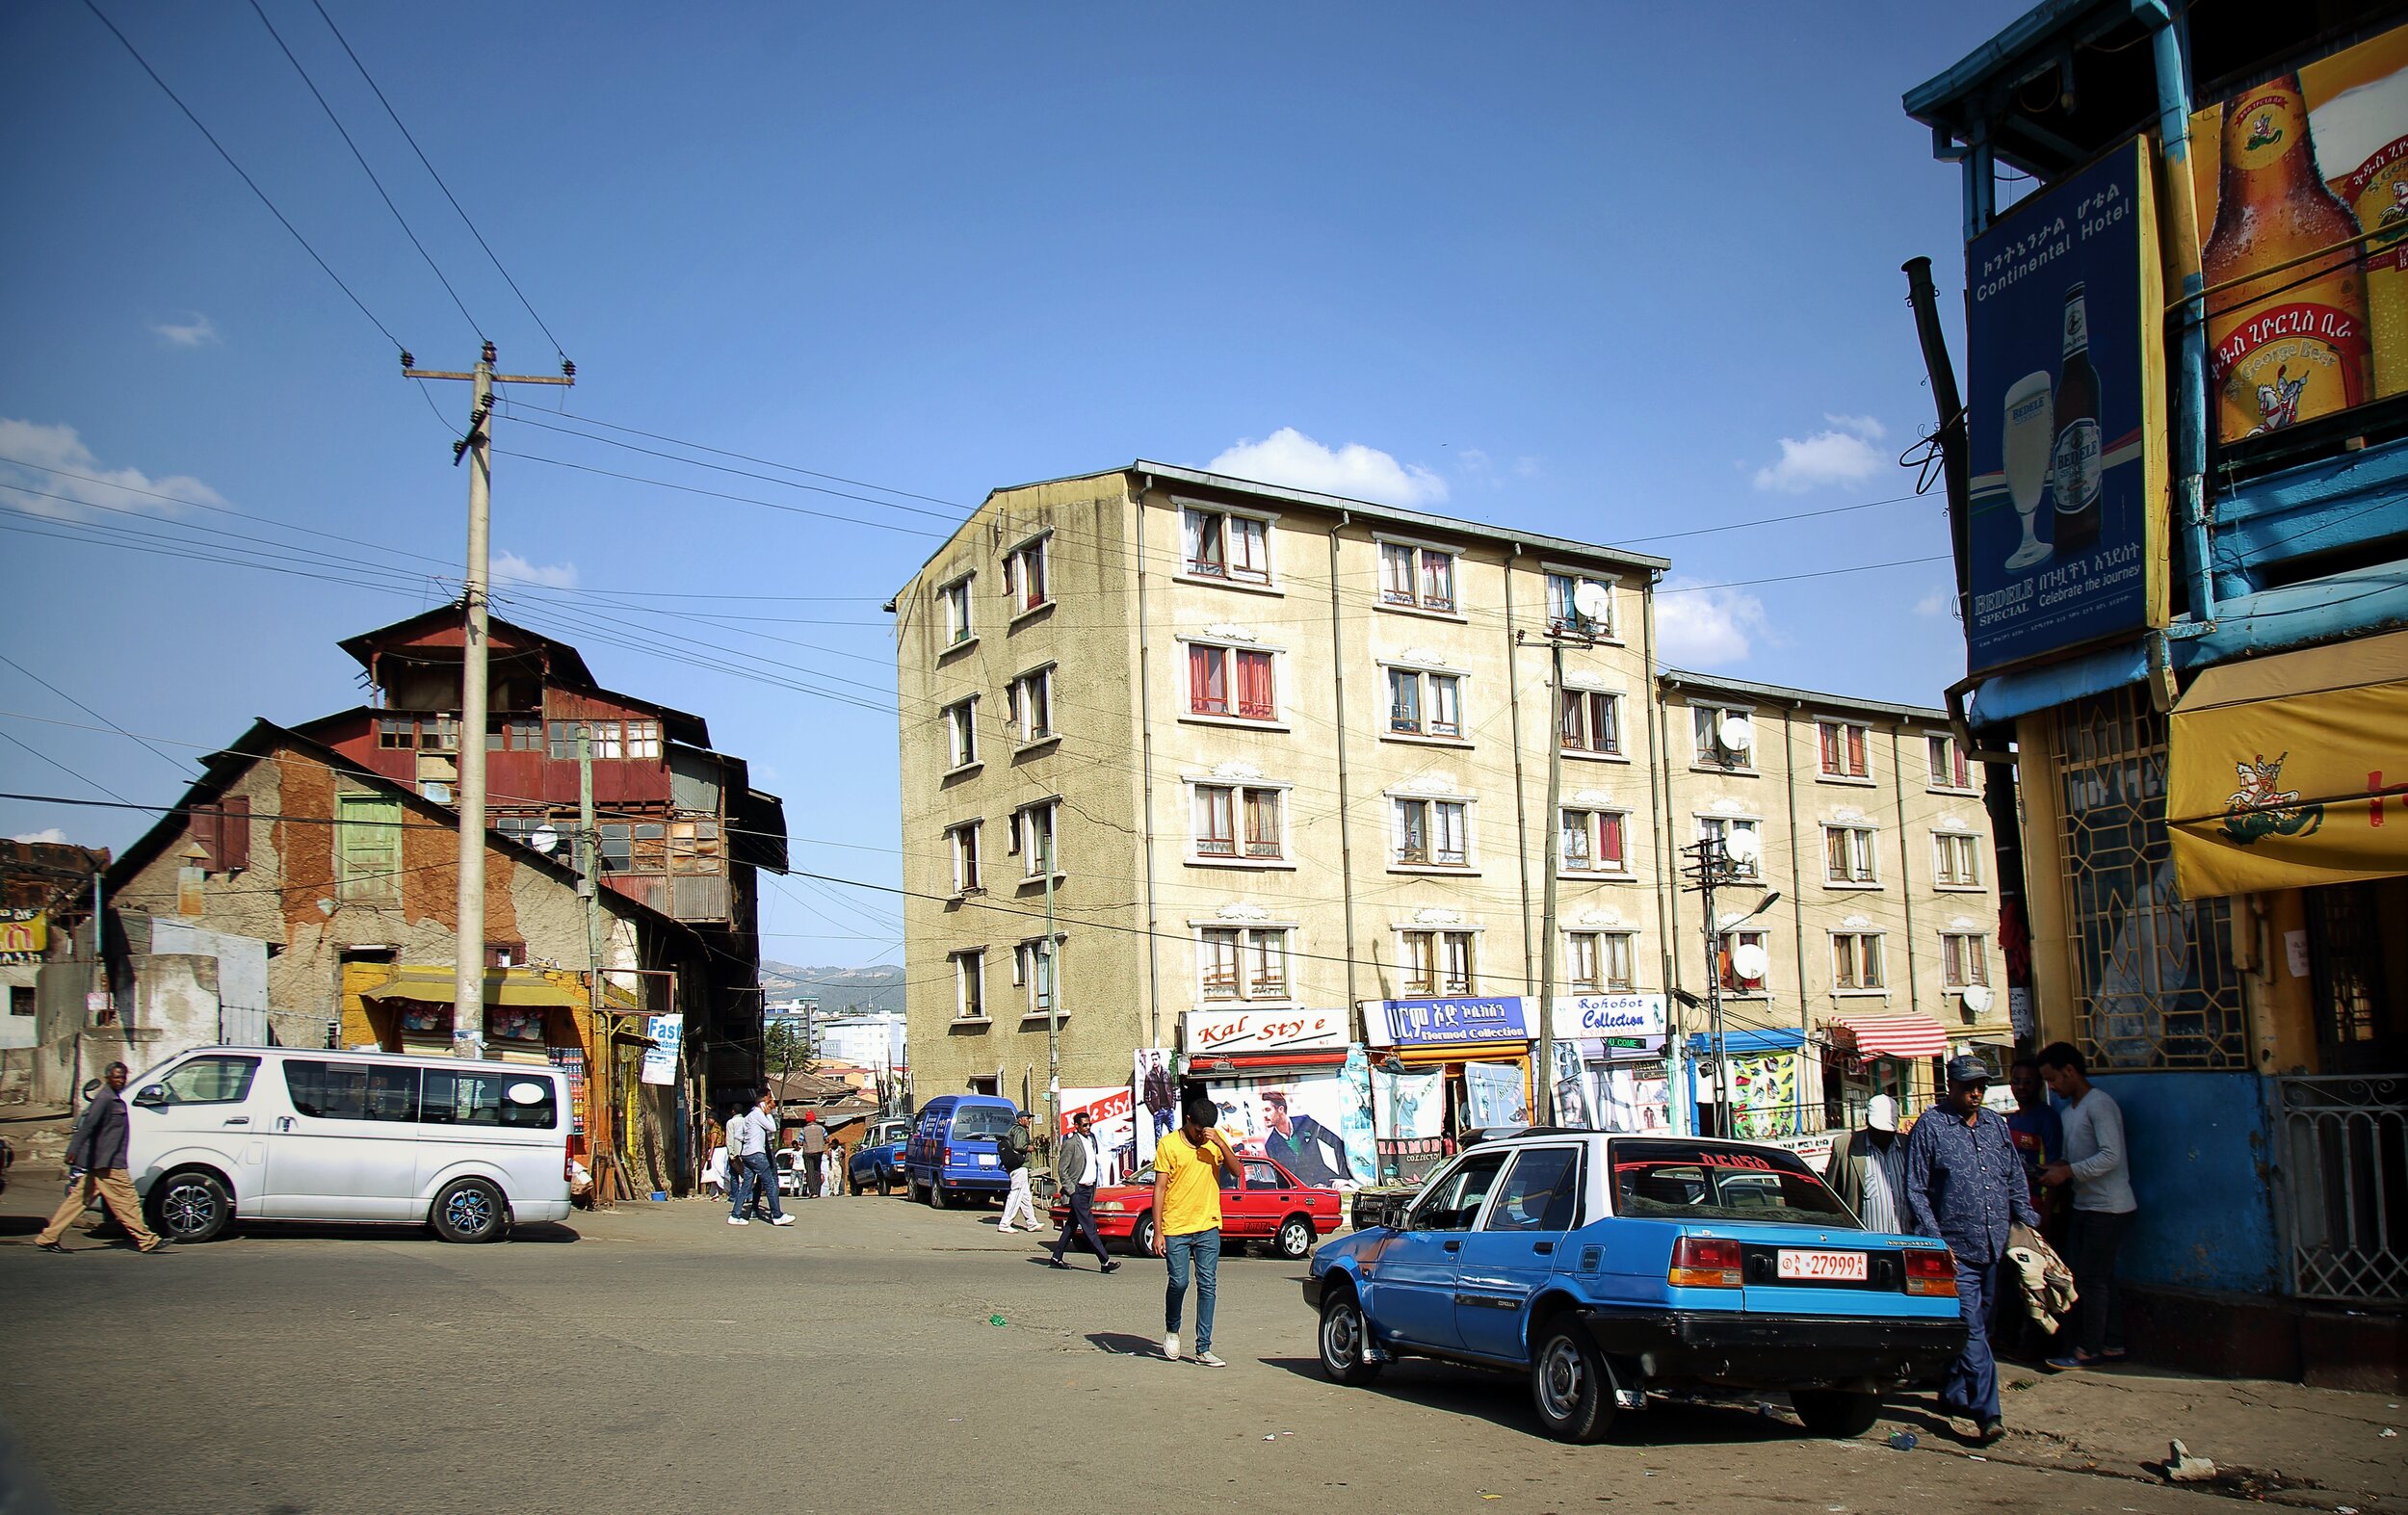  Piazza is one of the oldest neighborhoods of Addis Ababa. It used to be the city center and market area. On the right is the five-story building that used to be the tallest in Addis. It was the residence of the Armenian engineer and chief architect 